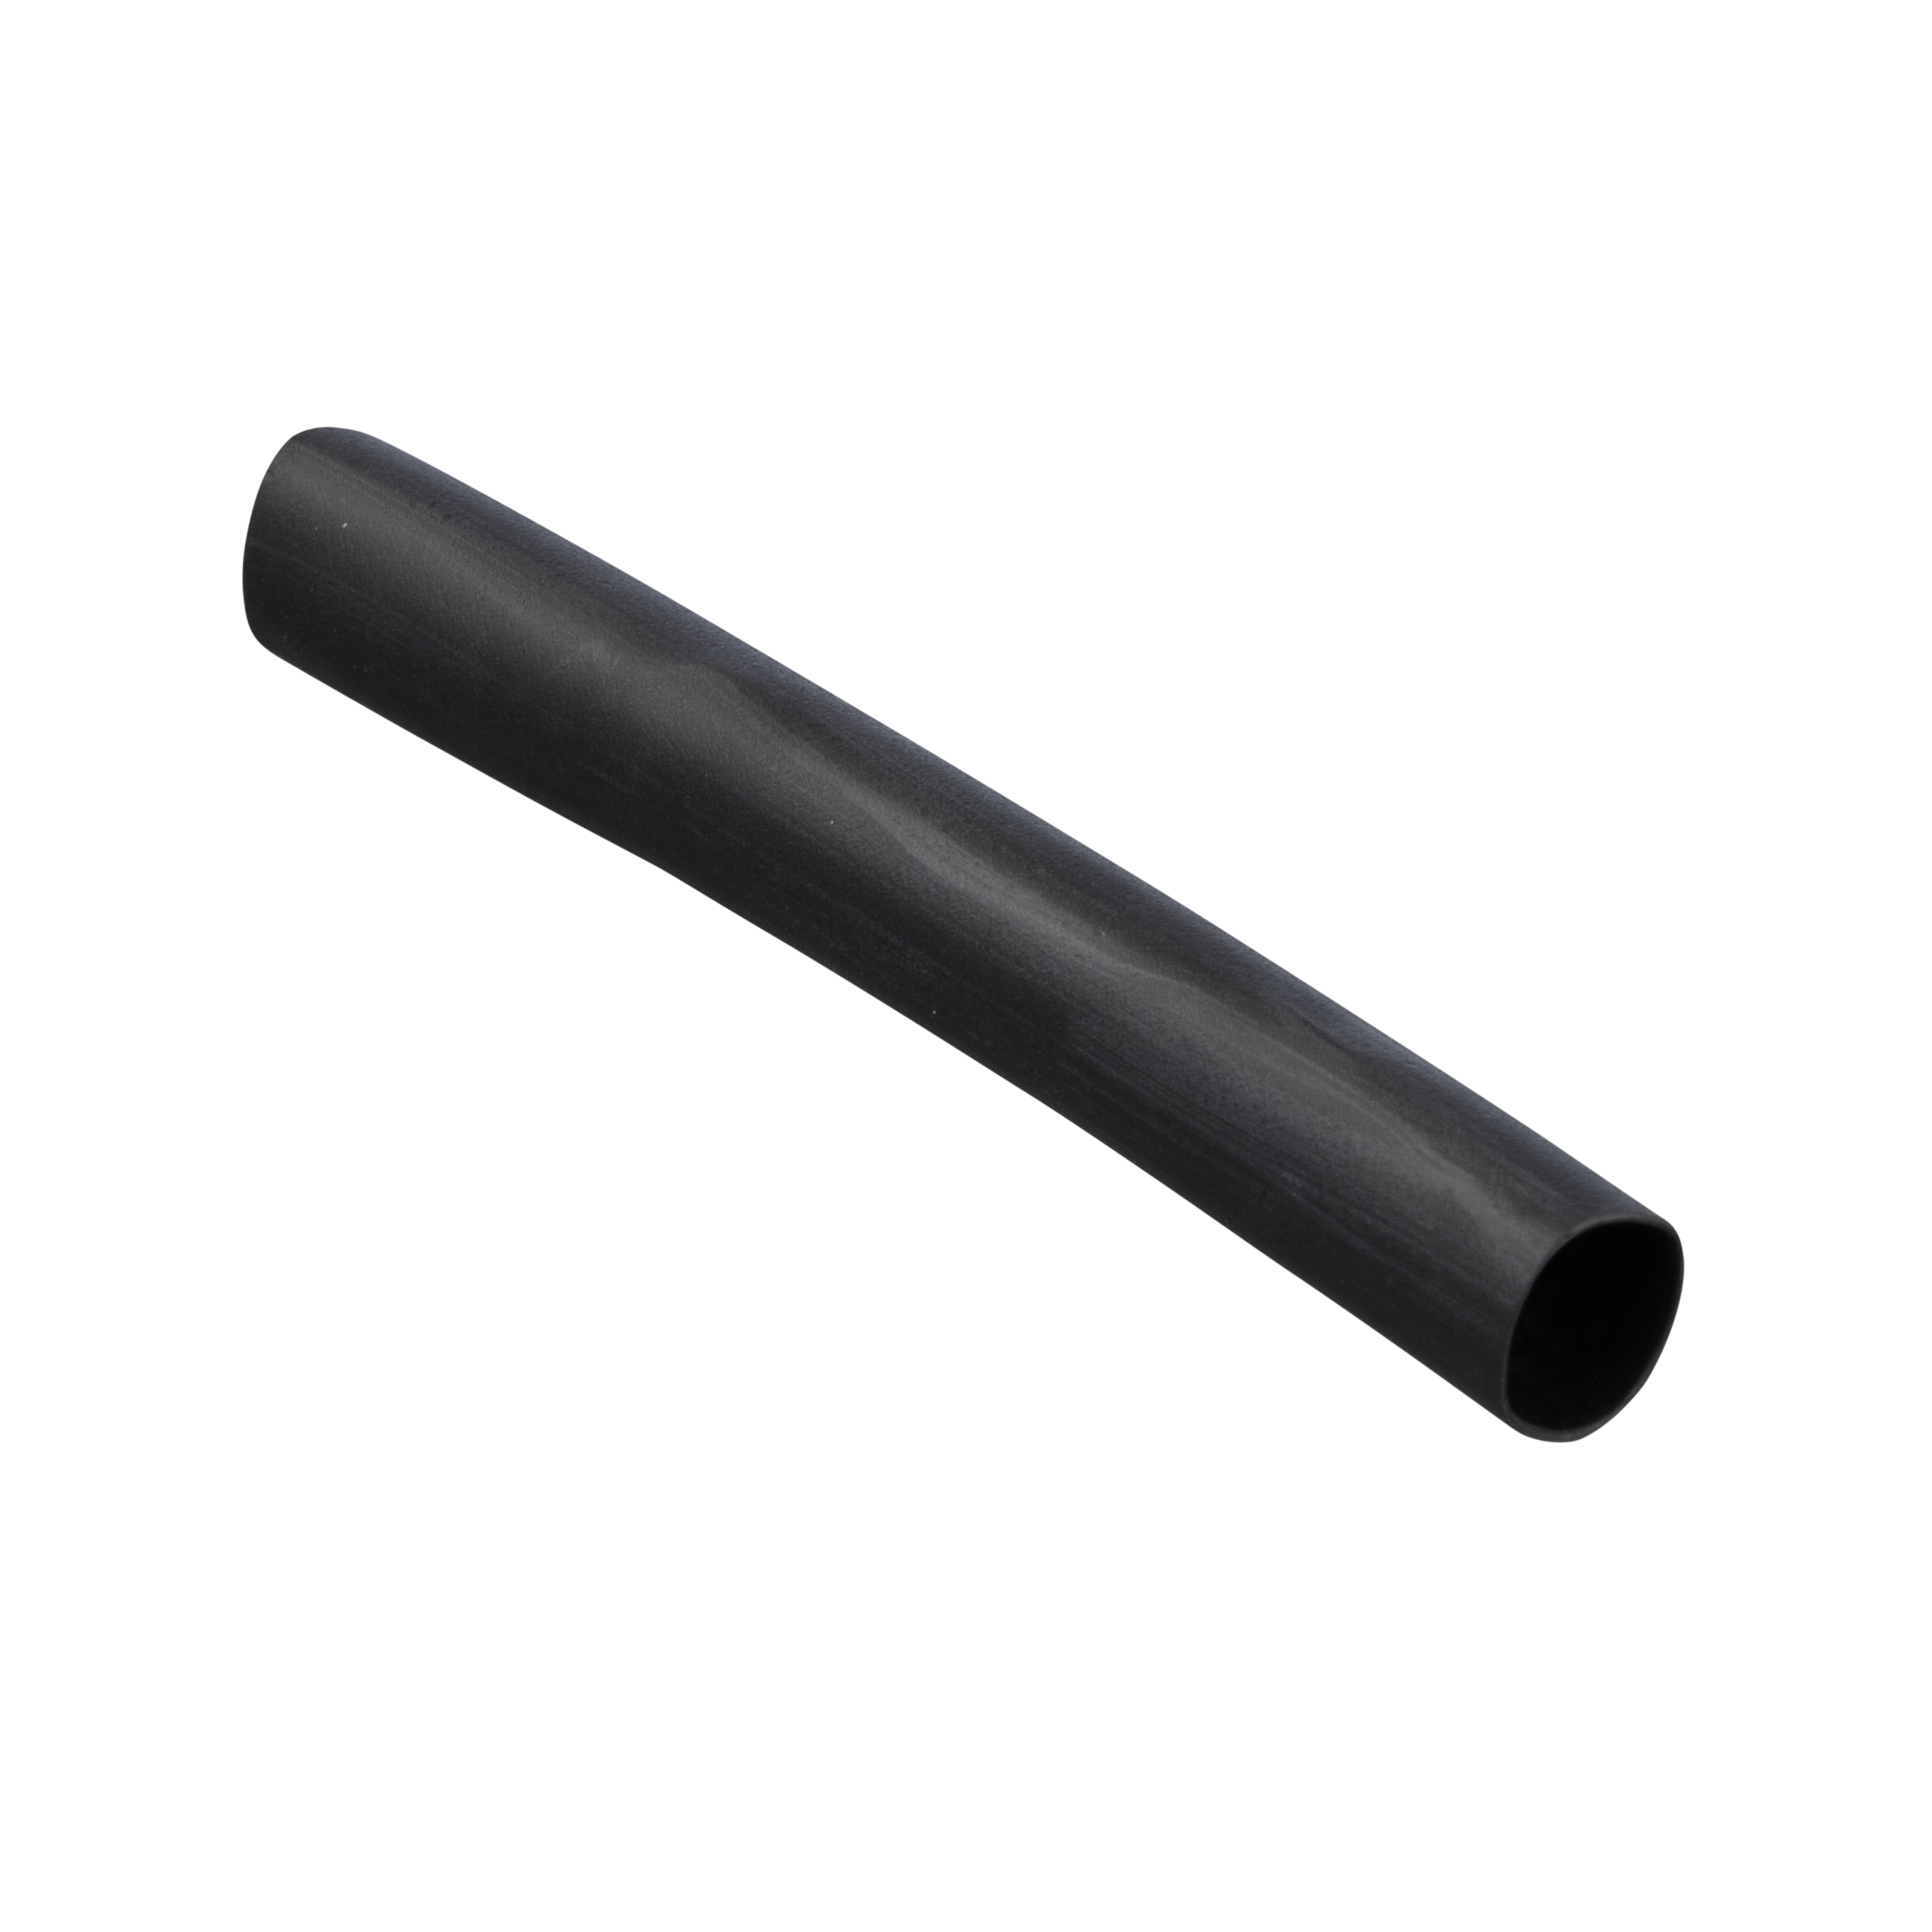 Dual Wall Heat Shrink Tubing 3:1 Ratio Heat Activated Adhesive Glue Lined Marine Shrink Tube Cable Sleeving Wrap Protector Transparent 4Ft Heat Shrink Tubes 3/8 9.5mm 